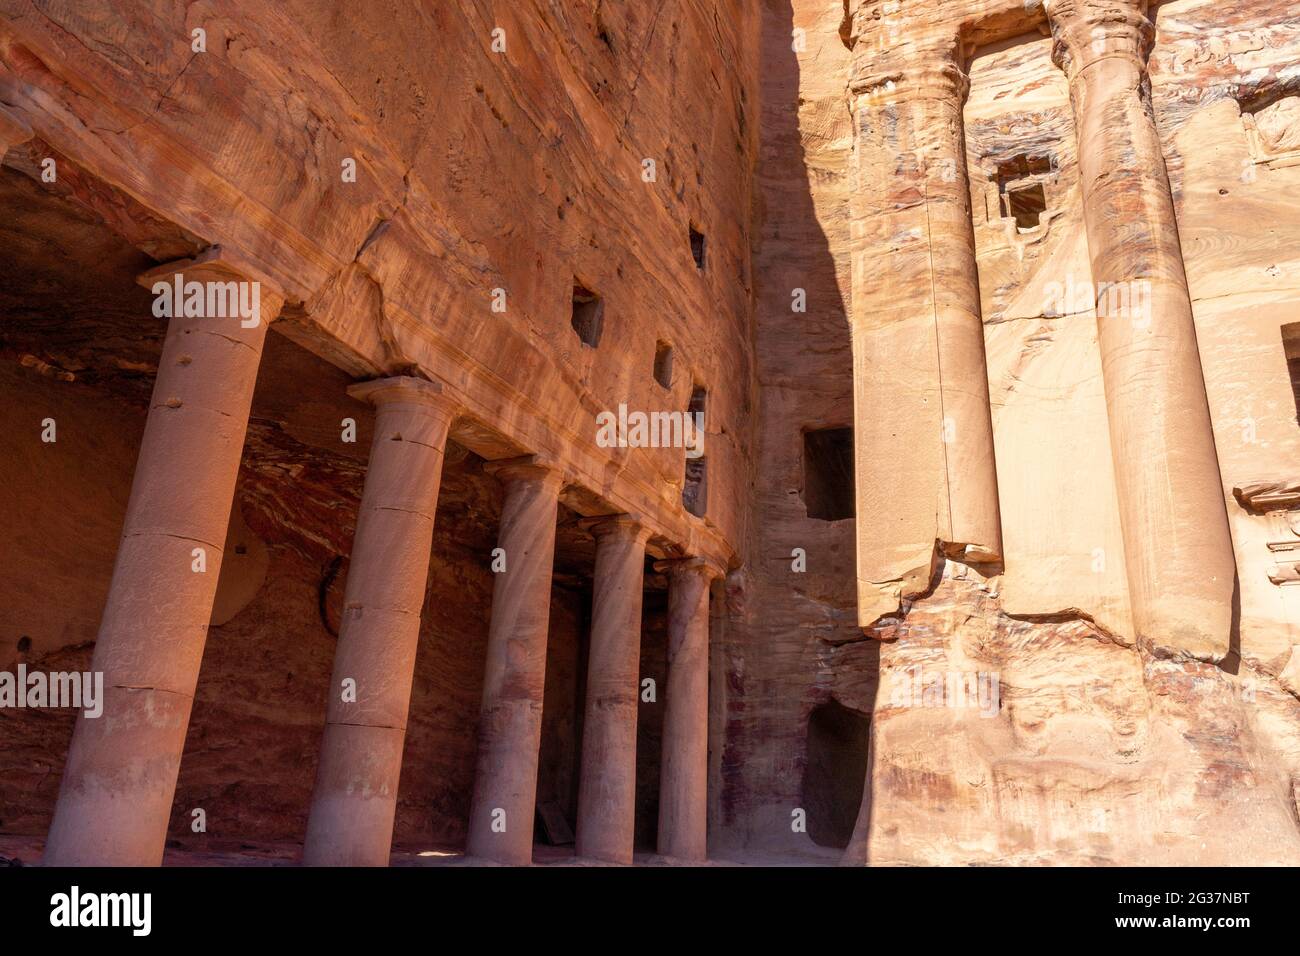 Columns at colonnaded courtyard in front of Urn tomb, Petra, Jordan Stock Photo